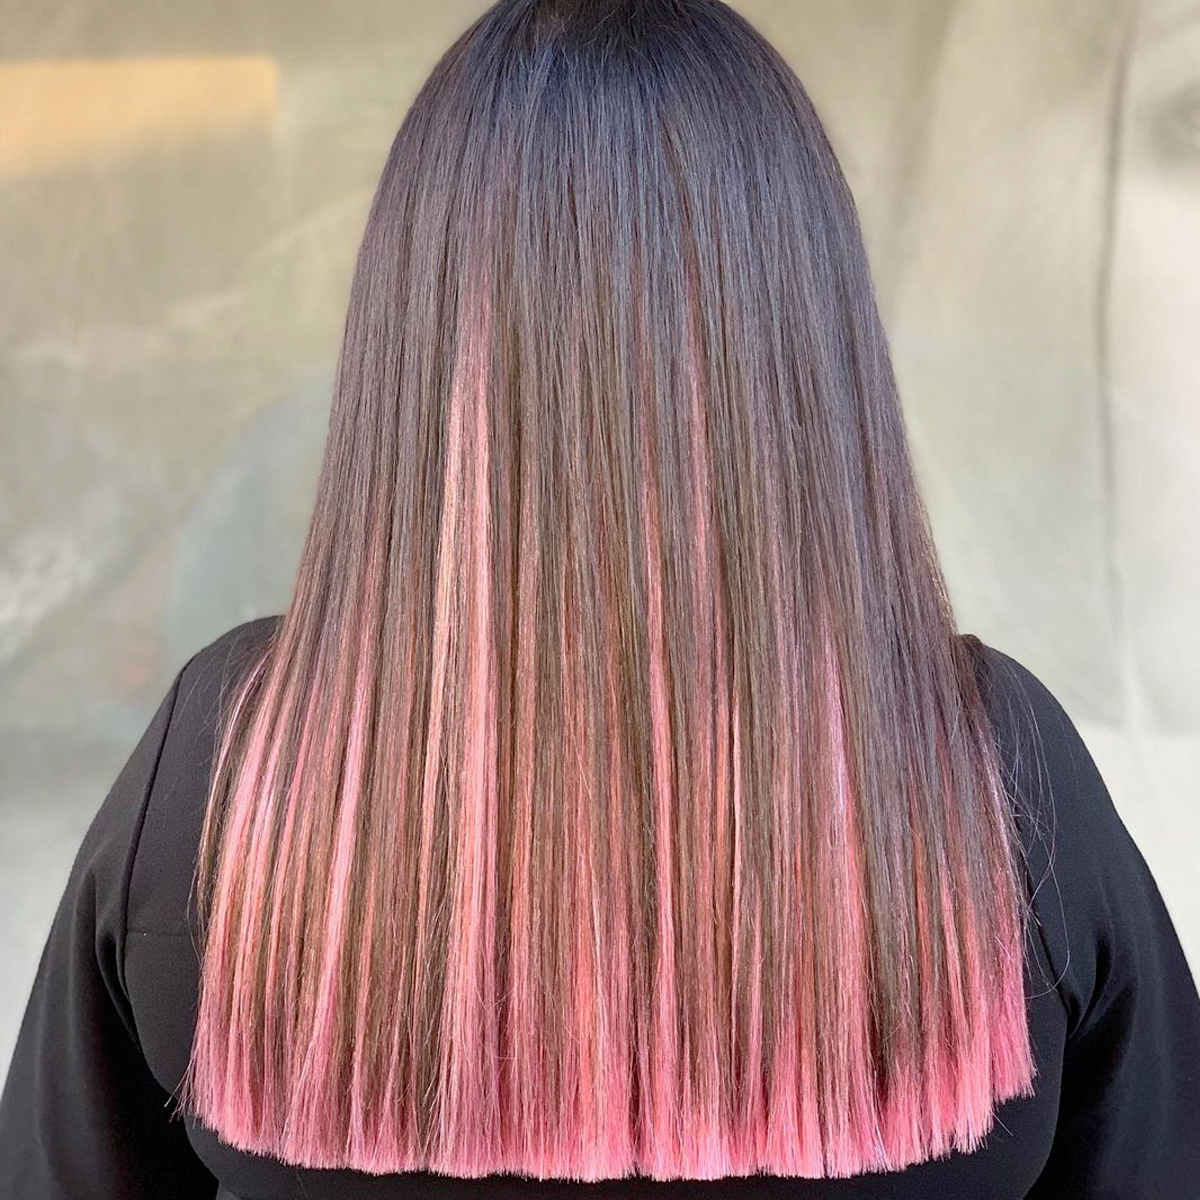 Pink hair extensions: ombre trend, mermaid color, pastel and light